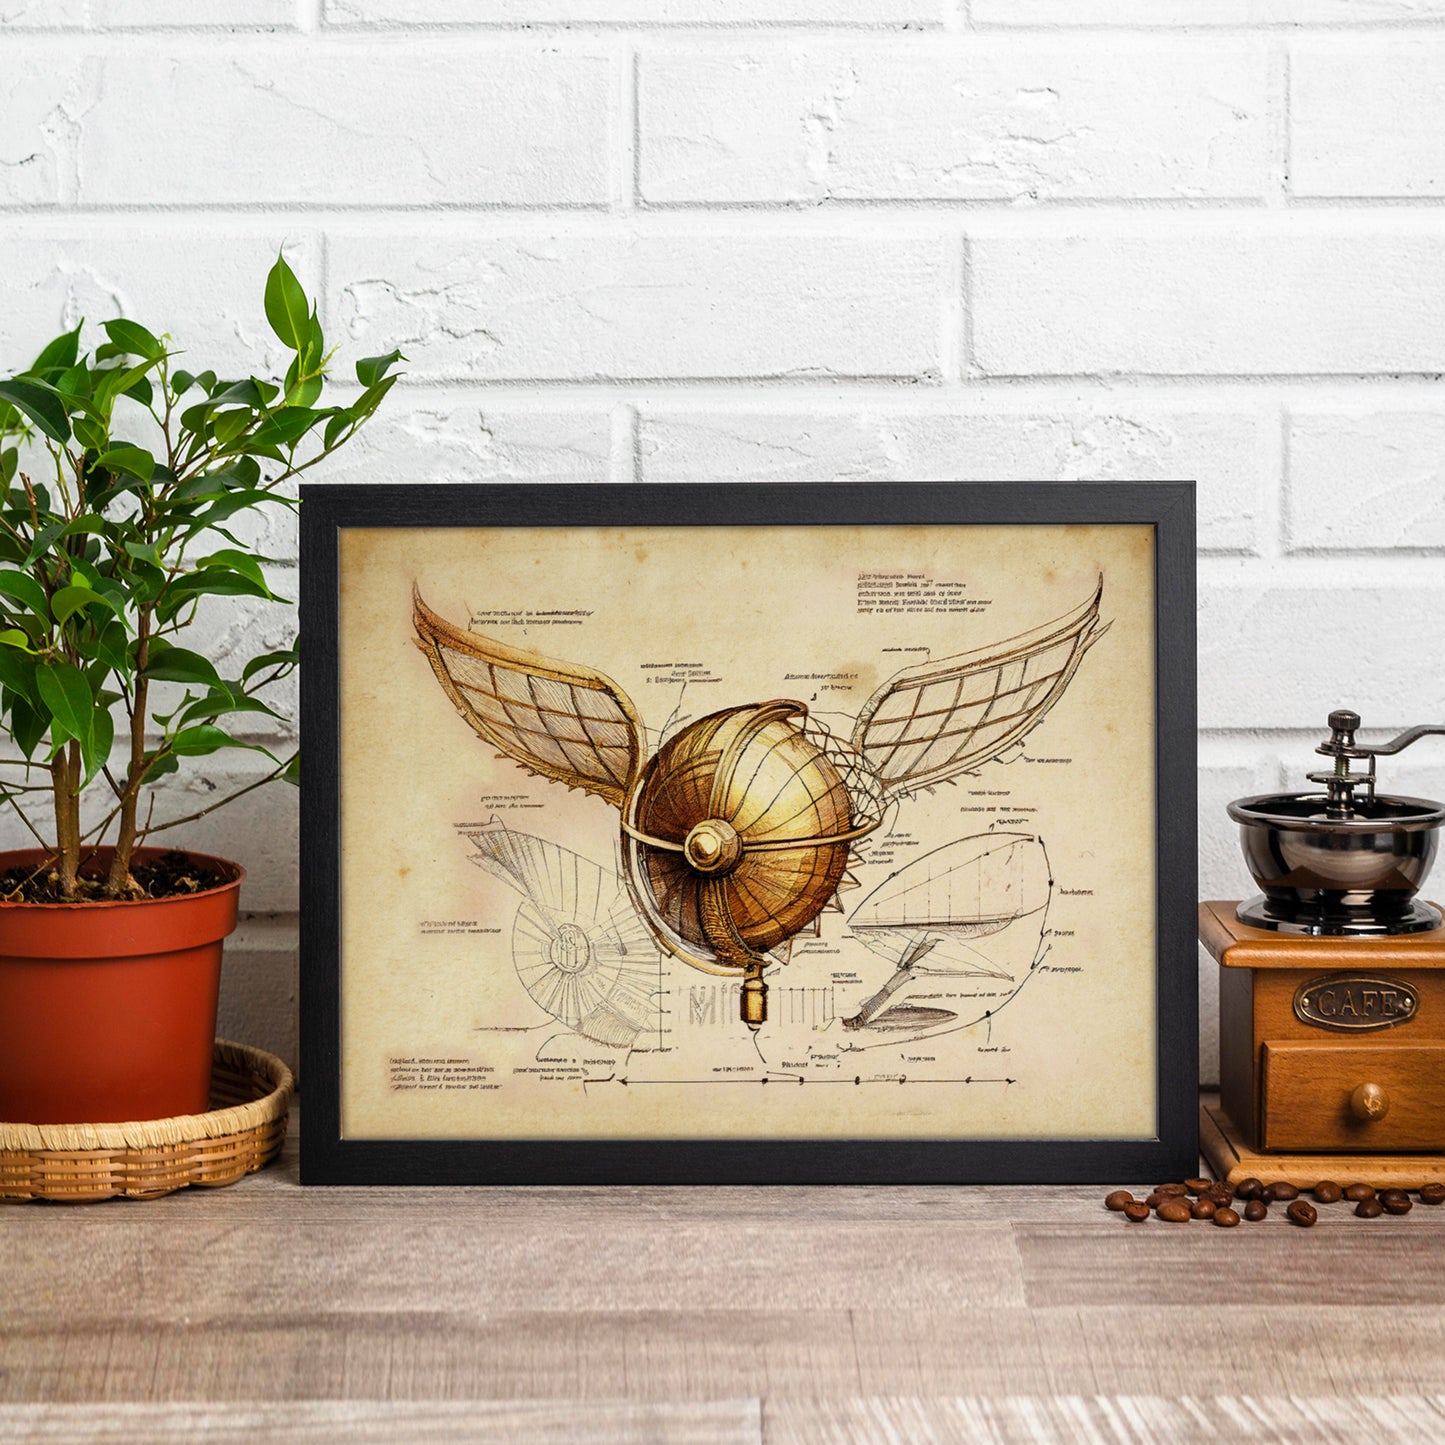 The Golden Snitch : Poetry - Poem : Harry Potter : Archival Quality Art  Print